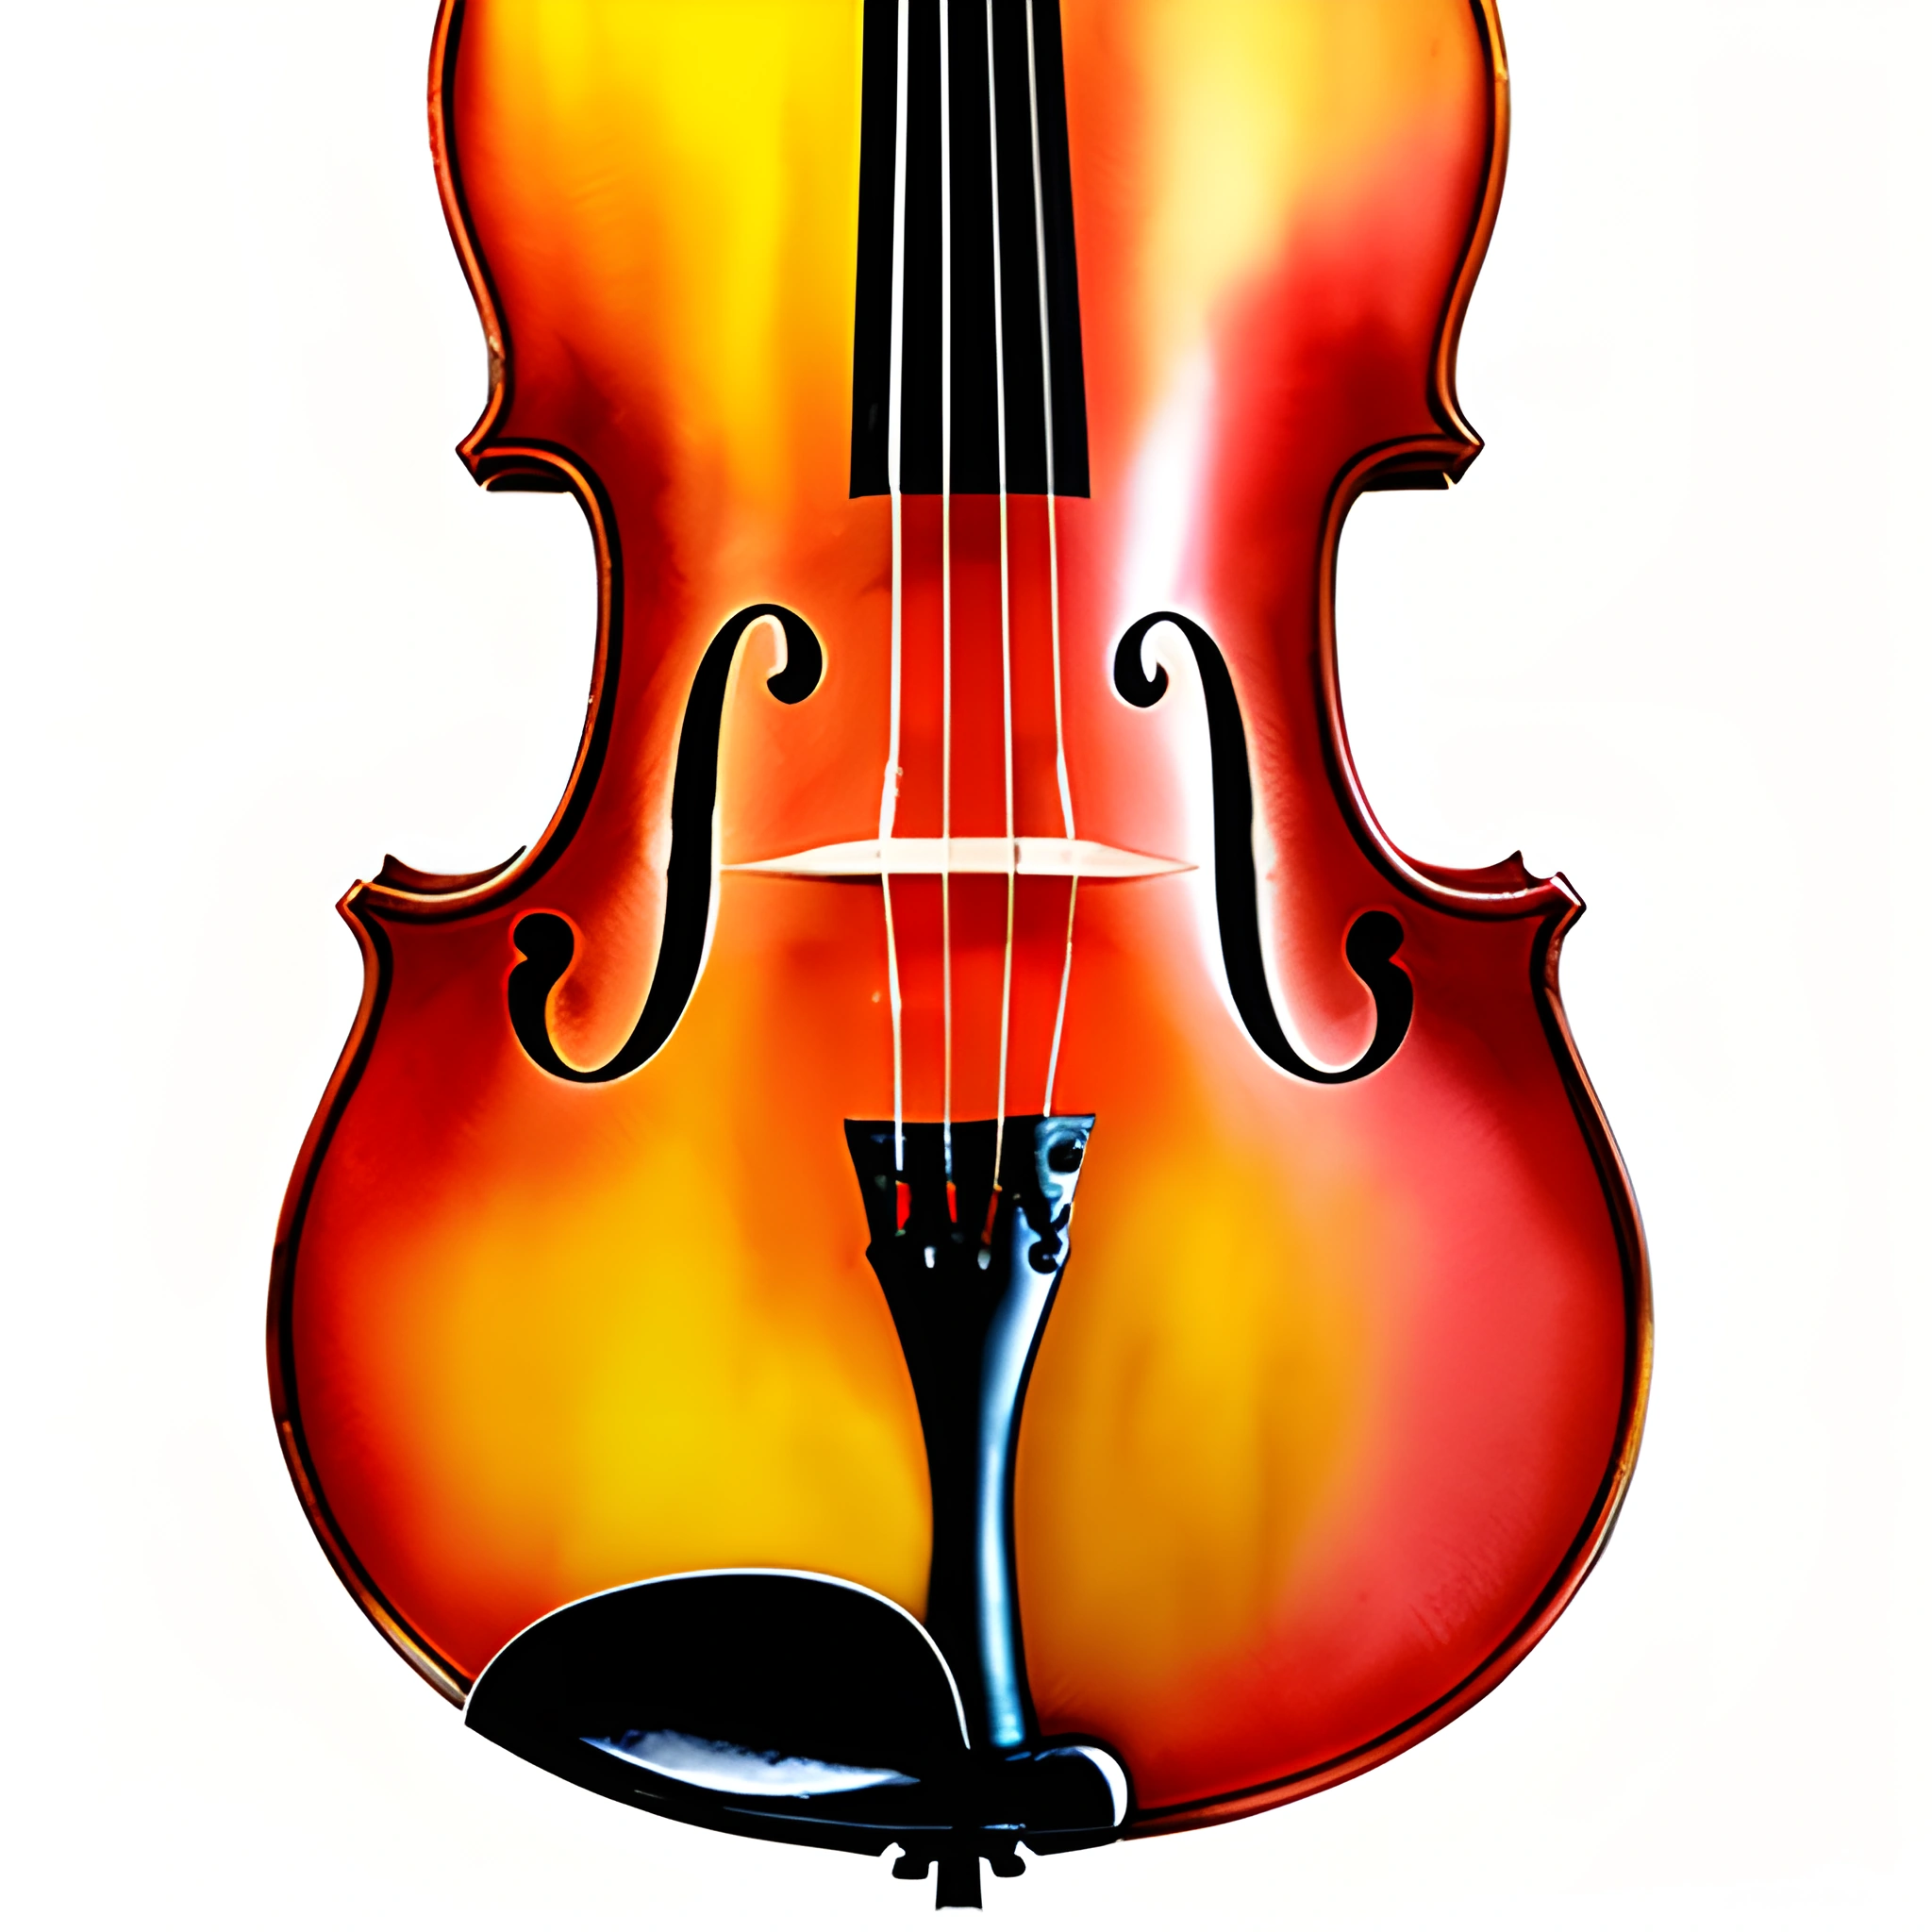 violin with a bow and a bow rest on a stand